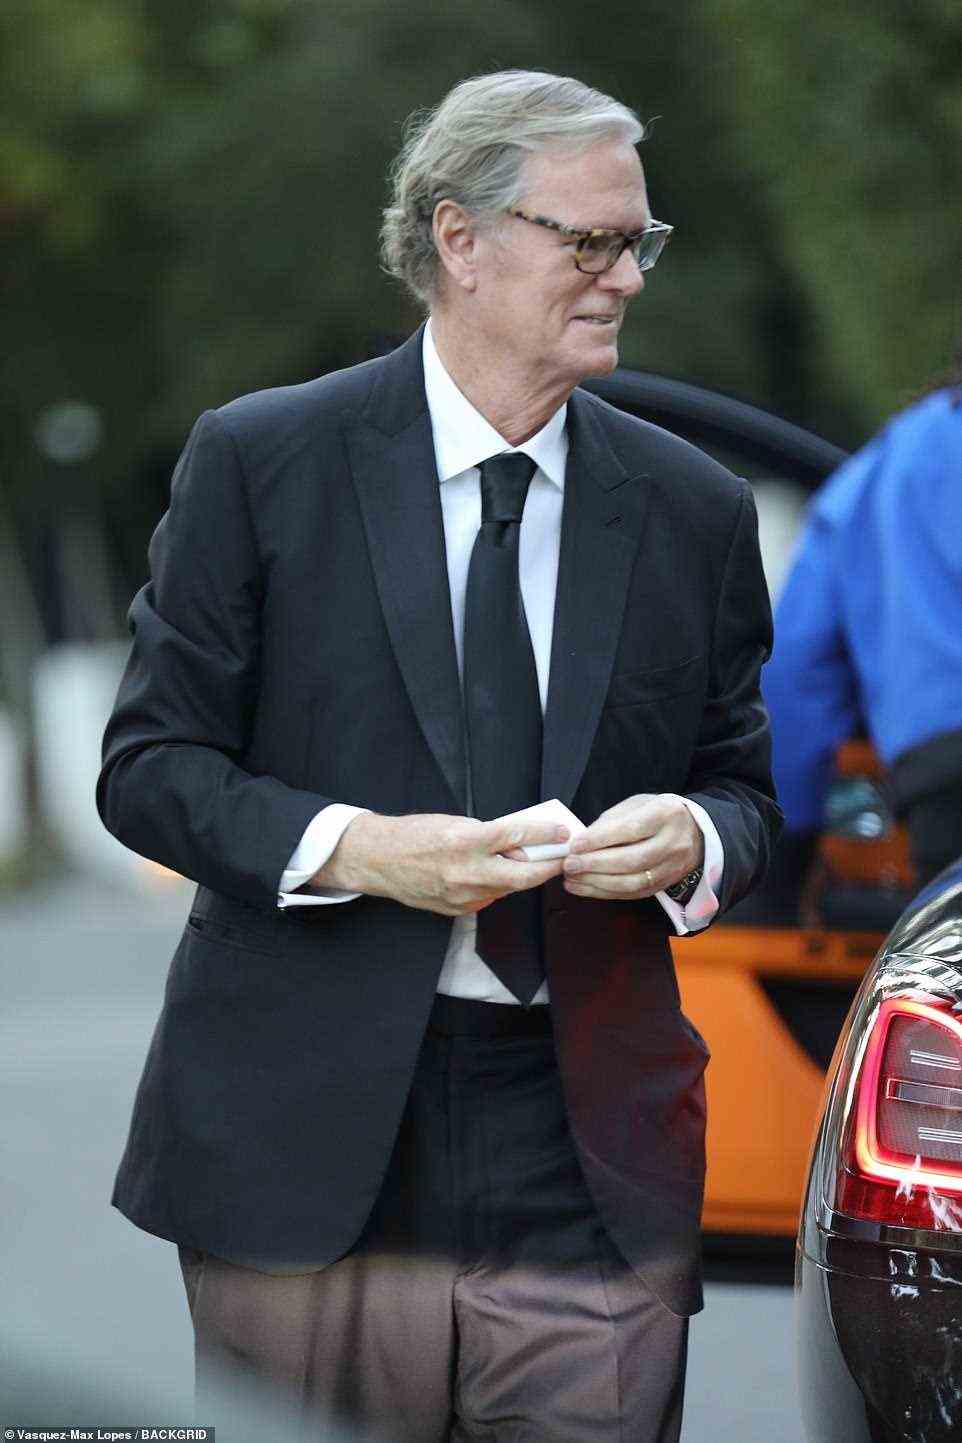 Classic: Paris' father Rick Hilton, 66, cut a classic figure in a solid black suit paired with white dress shirt and a black tie